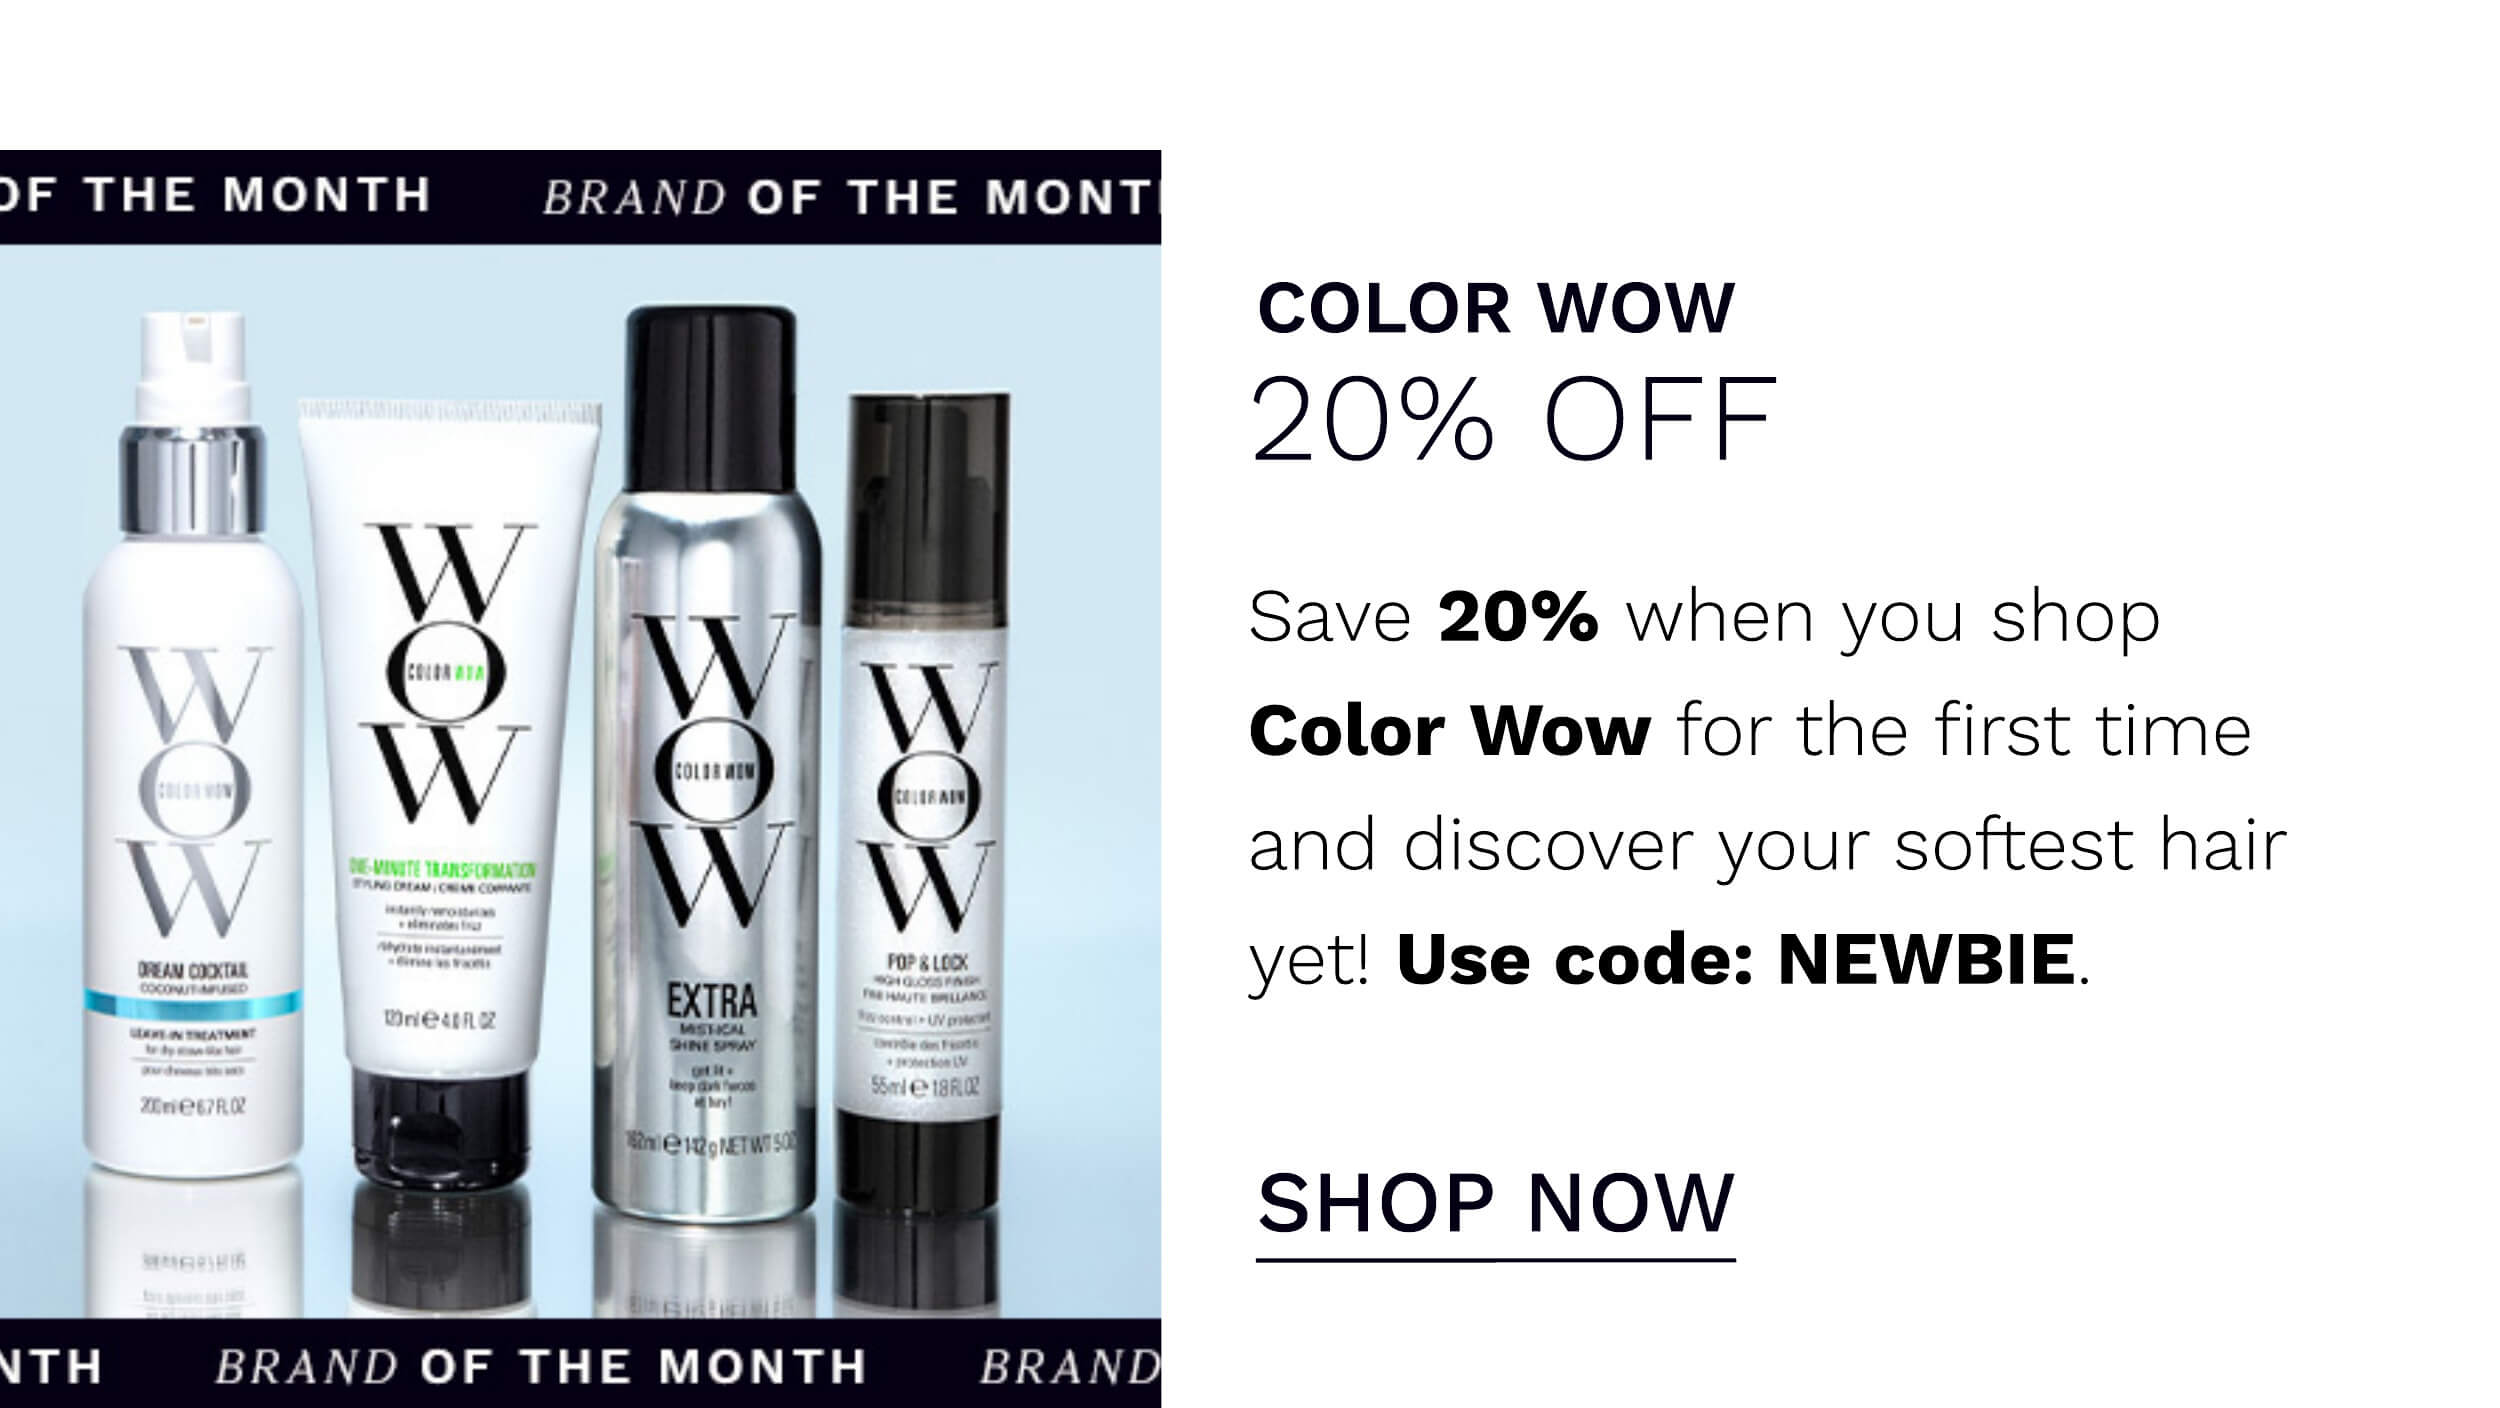  JF THE MONTH BRAND OF THE MONT COLOR WOW 20% OFF Save 20% when you shop Color Wow for the first time and discover your softest hair yet! Use code: NEWBIE. SHOP NOW TH BRAND OF THE MONTH 10D 